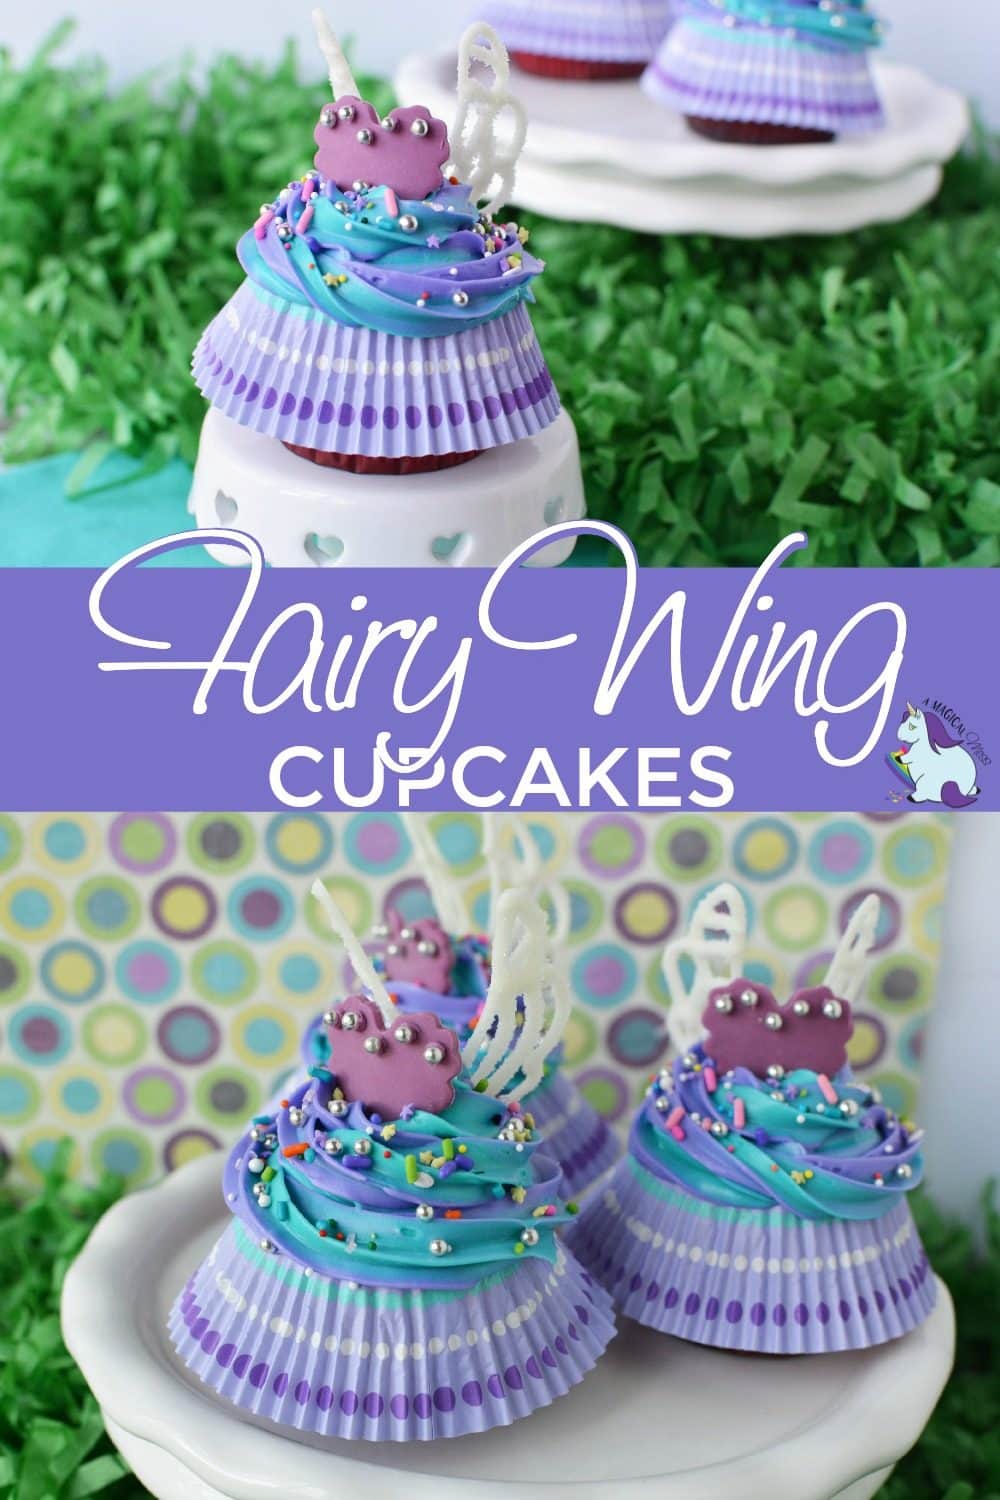 Cupcakes with skirts and wings on little stands